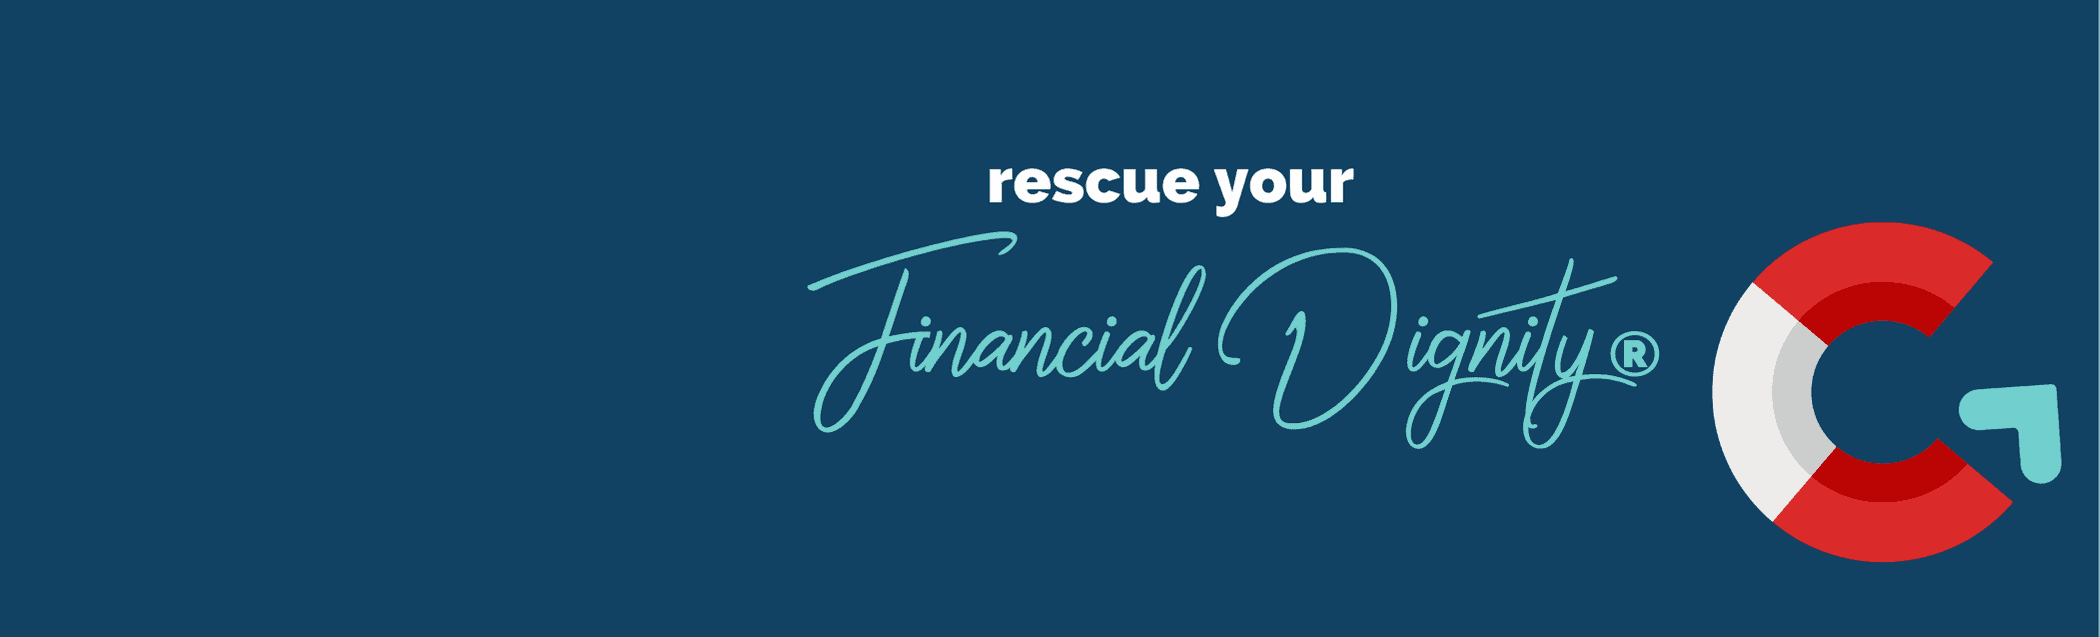 Empowering message on a dark blue background featuring the slogan 'rescue your financial dignity' with a stylized lifesaver ring symbolizing financial rescue or support.